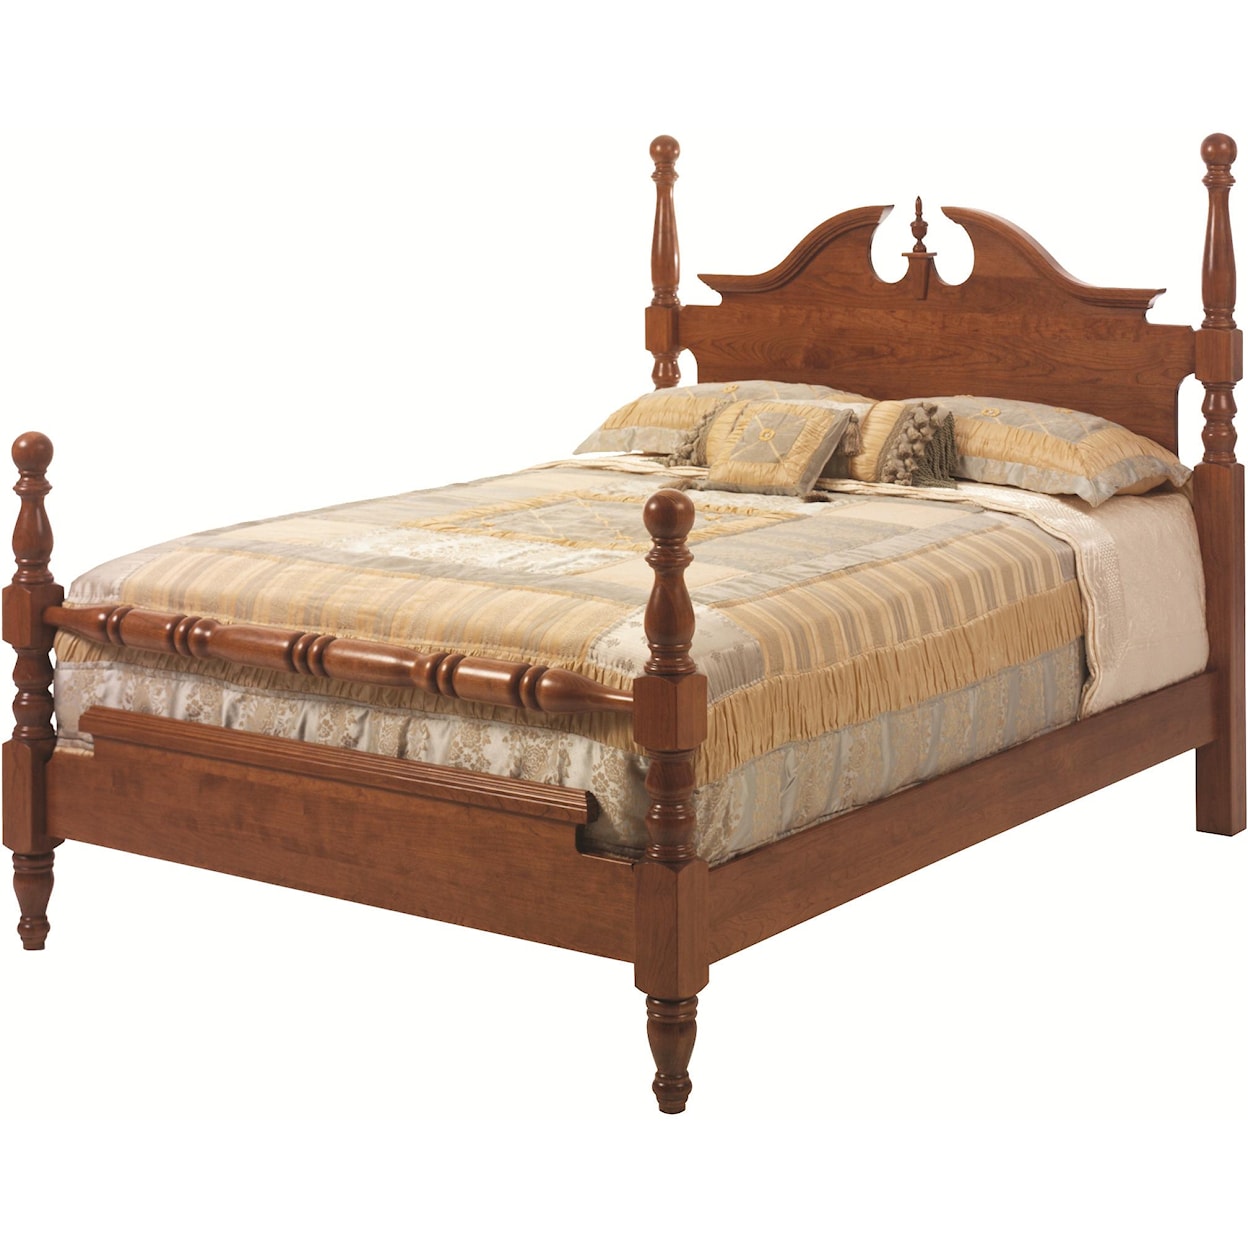 Millcraft Elegant River Bend Queen Cannon Ball Bed